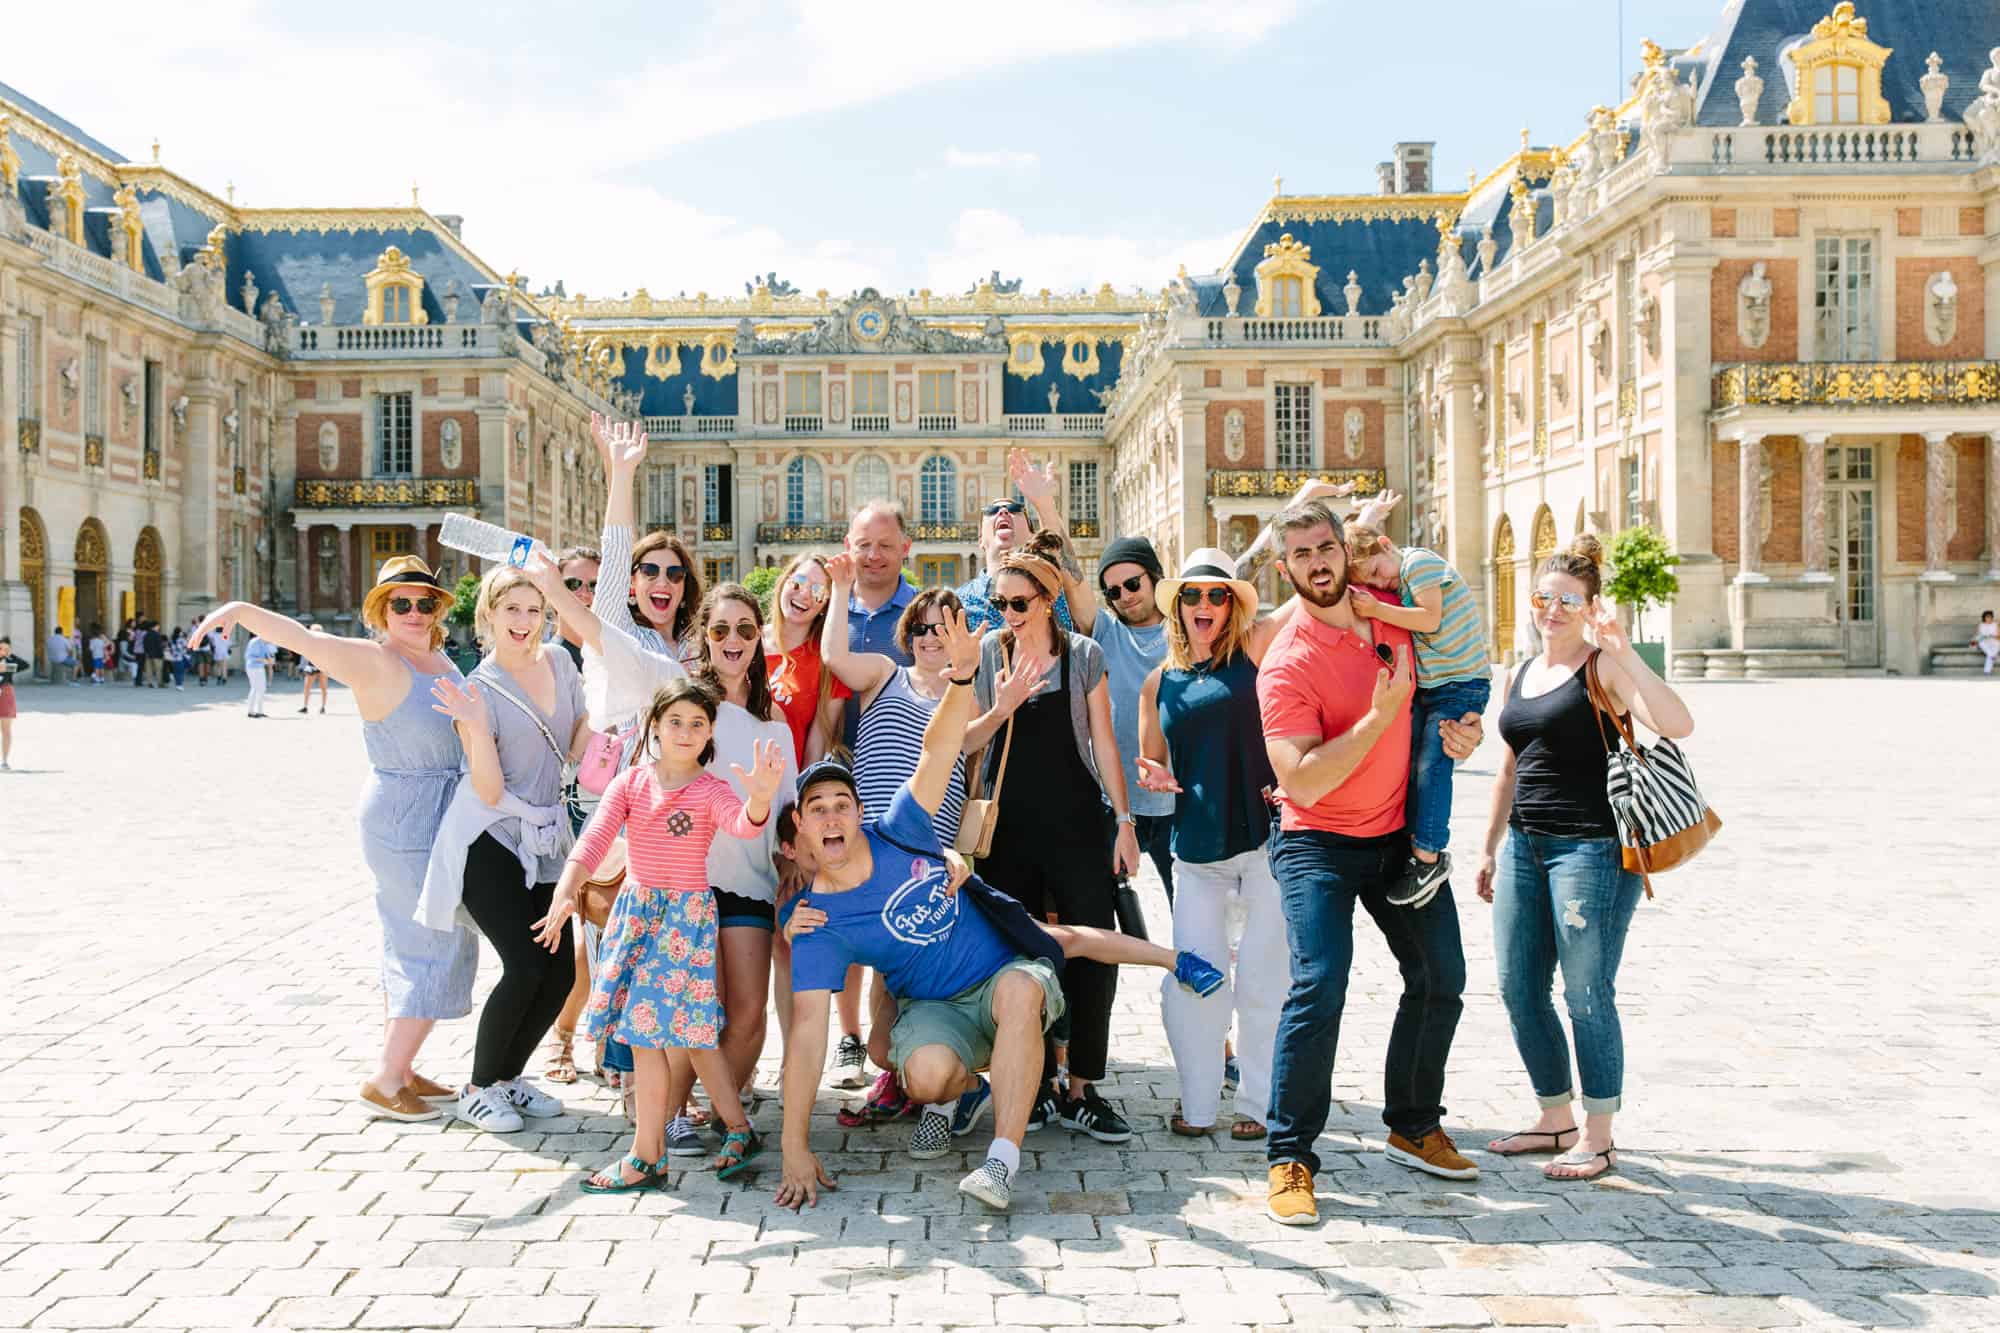 A group poses for a silly photo in front of the palace of Versailles.